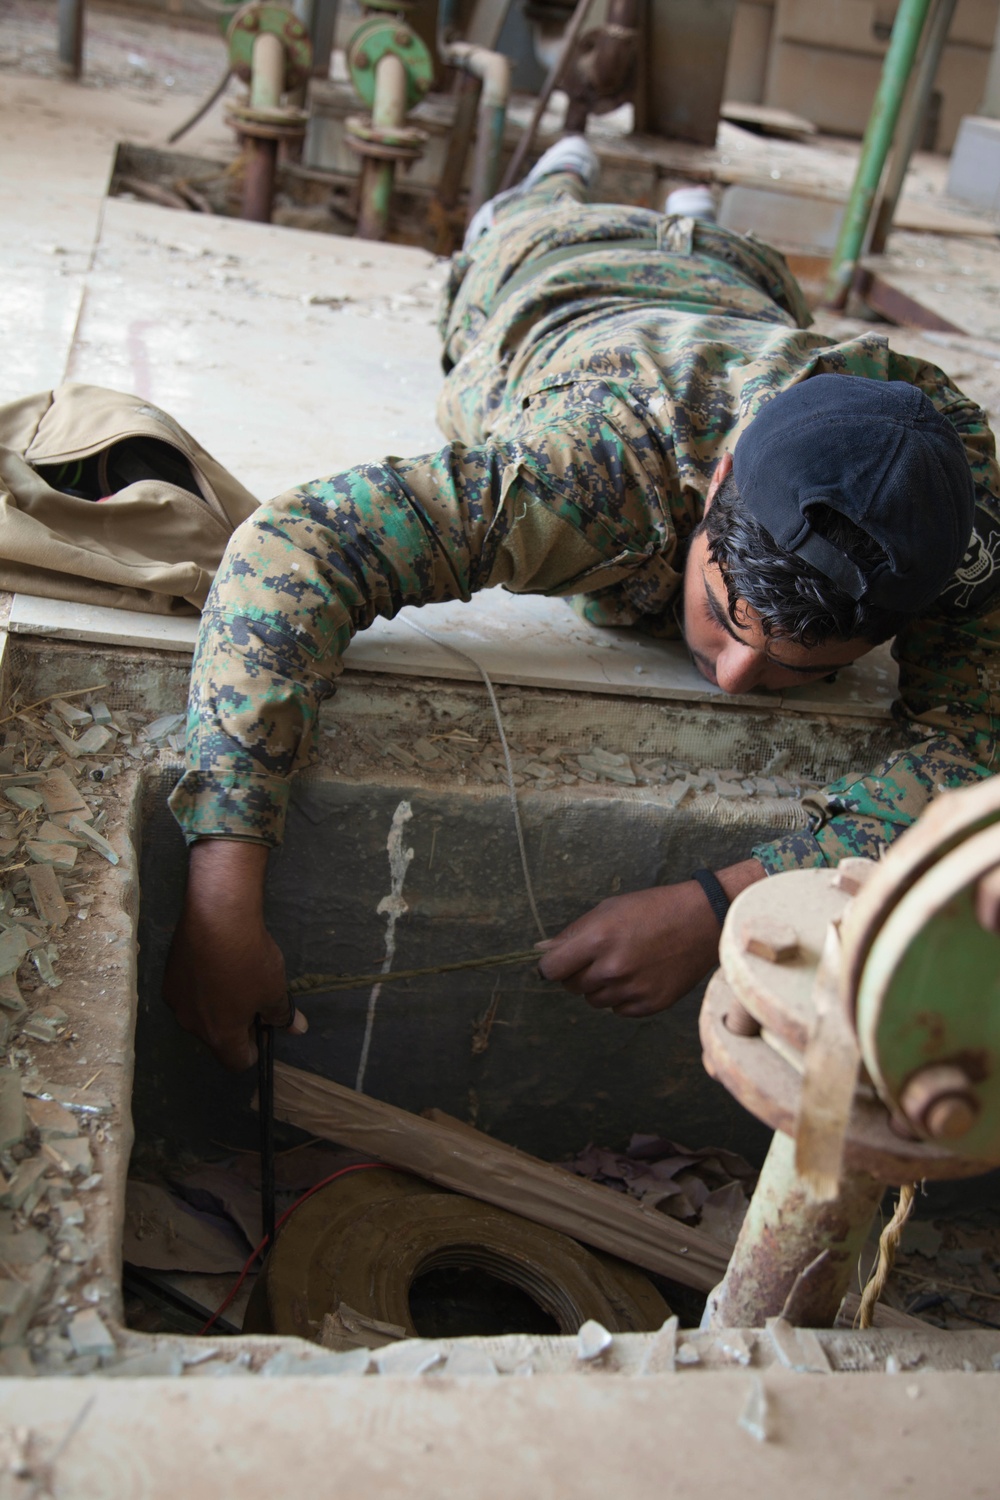 Syrian Democratic Forces train to detect, mark, and disable improvised explosive devices